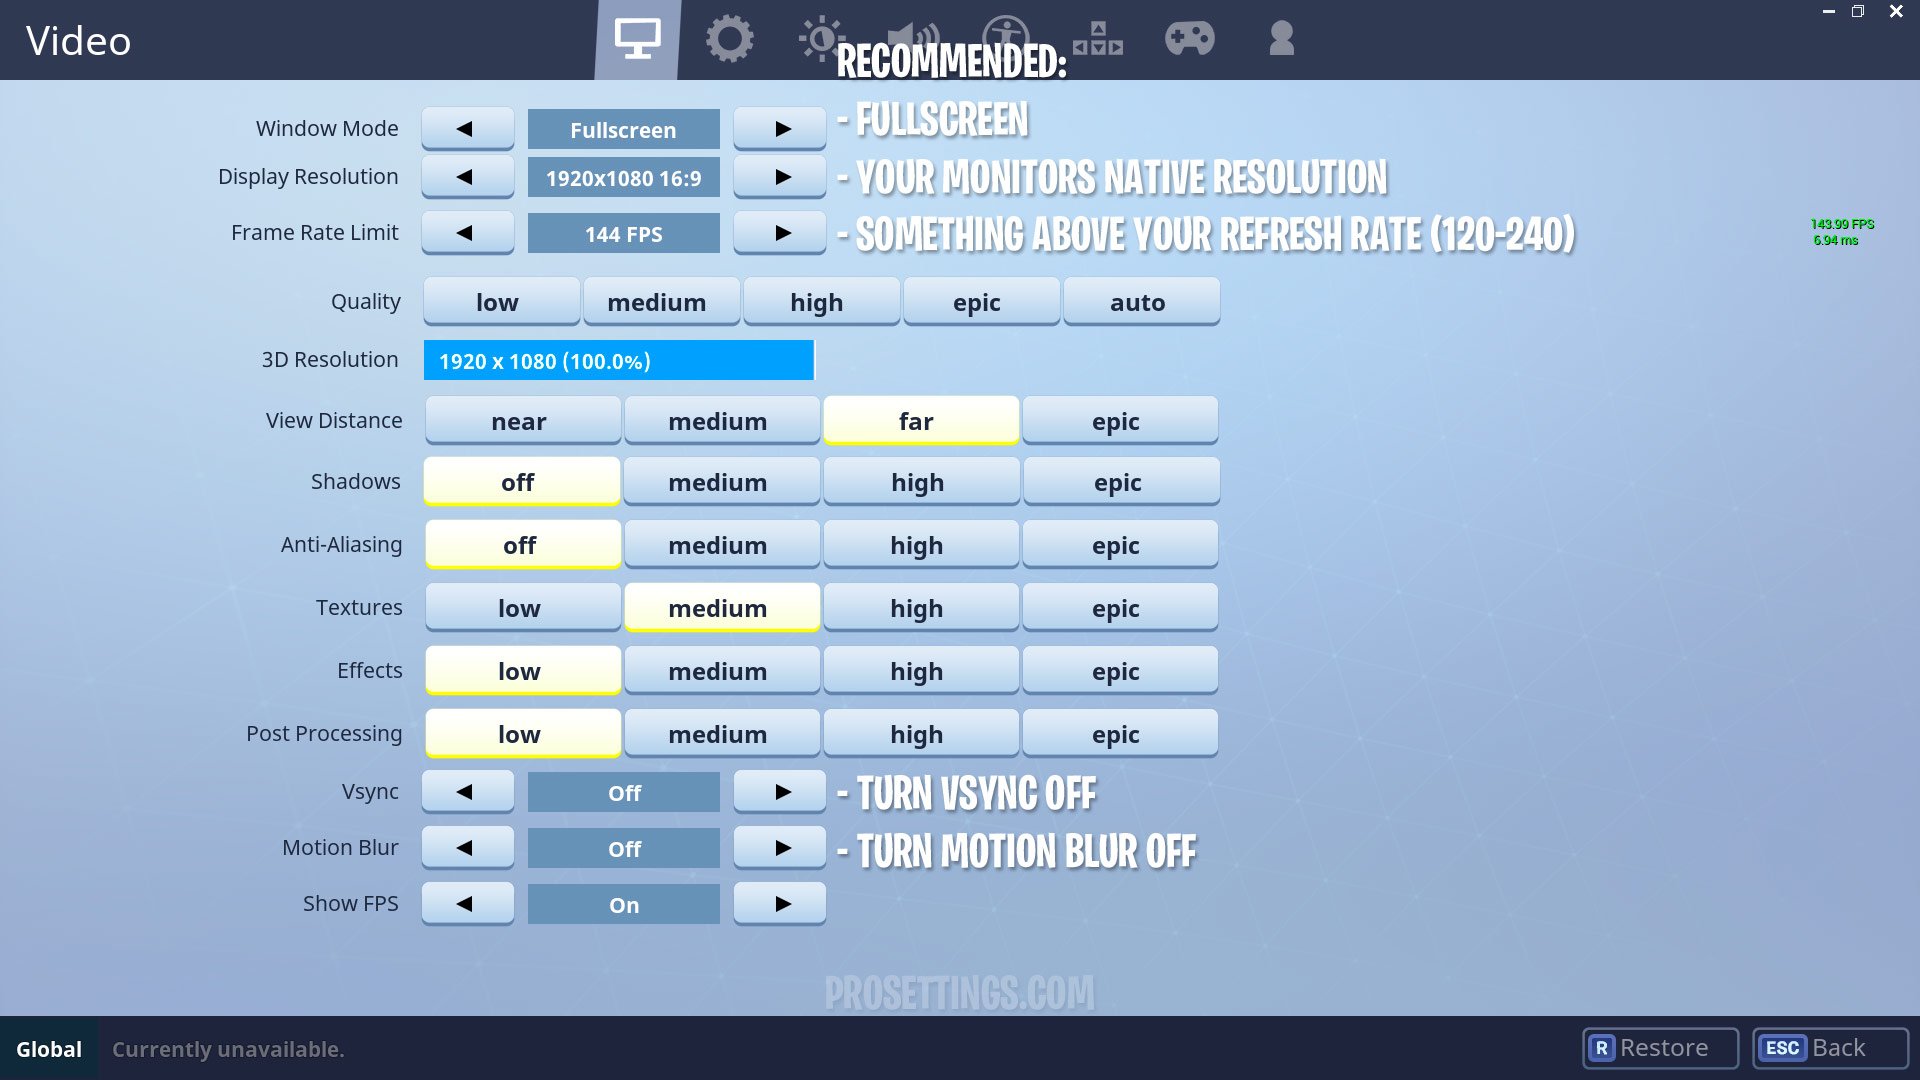 recommended fortnite video settings - how to lower ping on fortnite pc